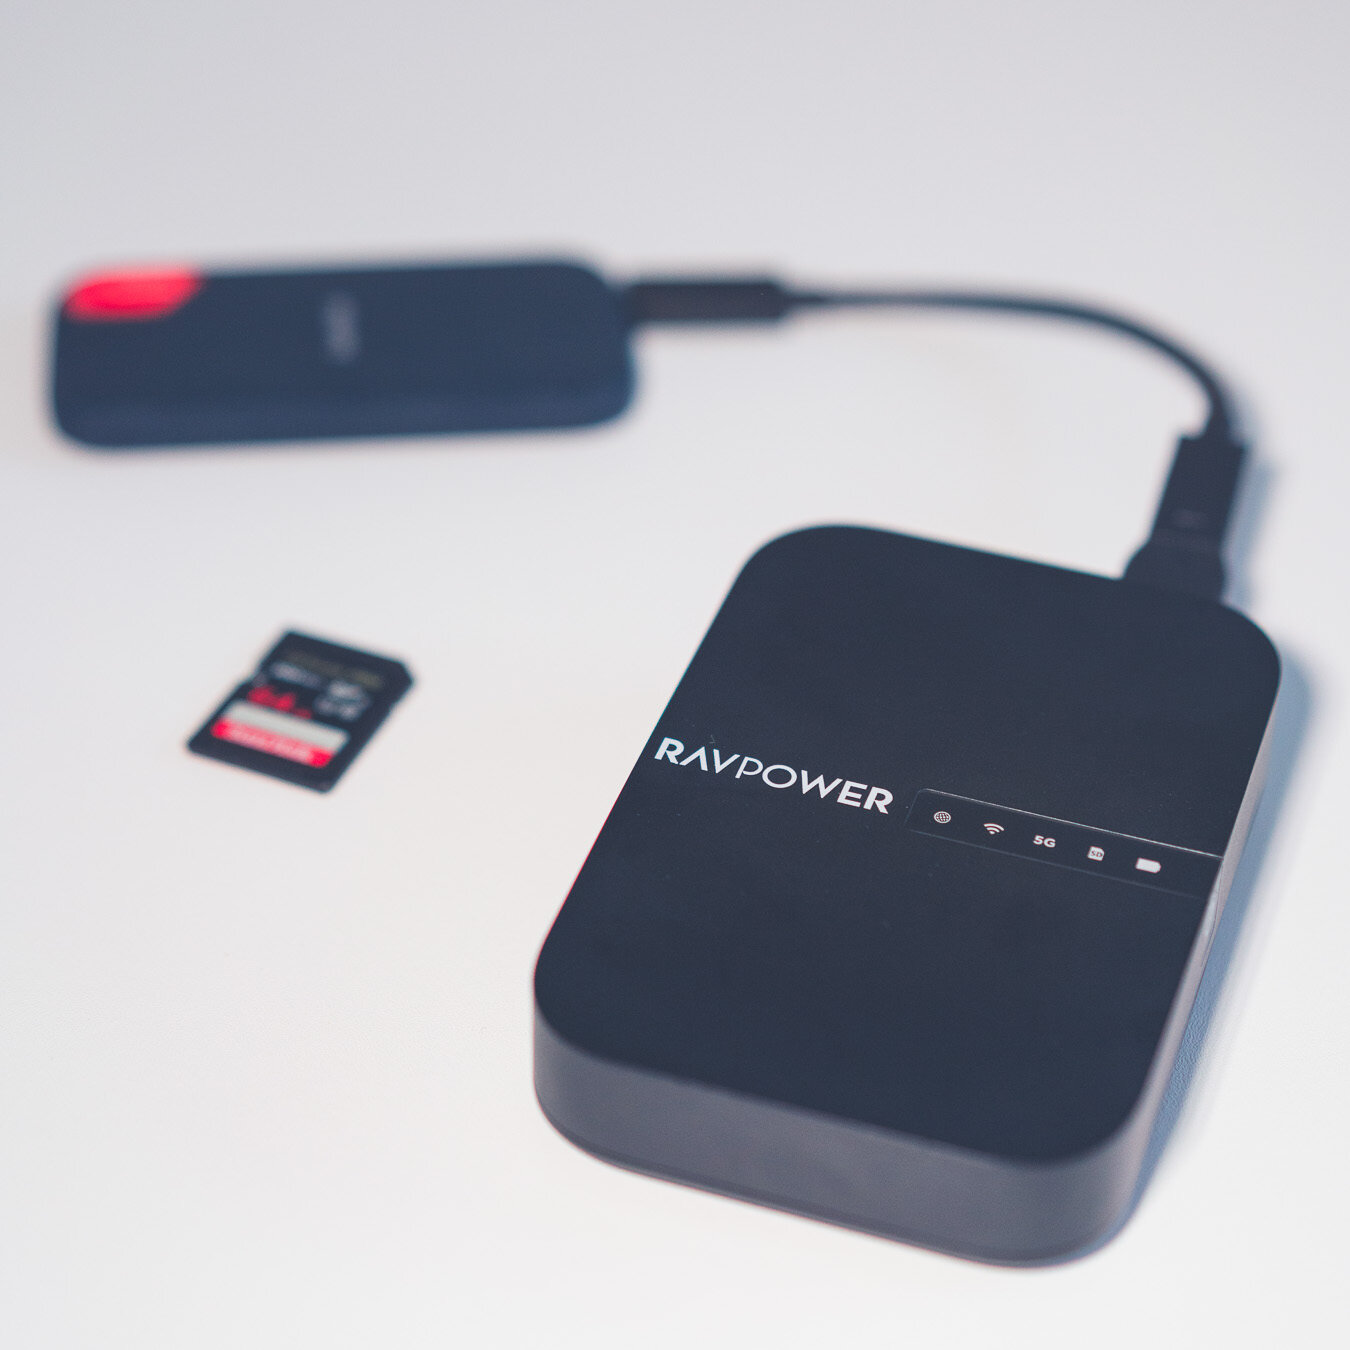 SD Card Solution | The Gnarbox